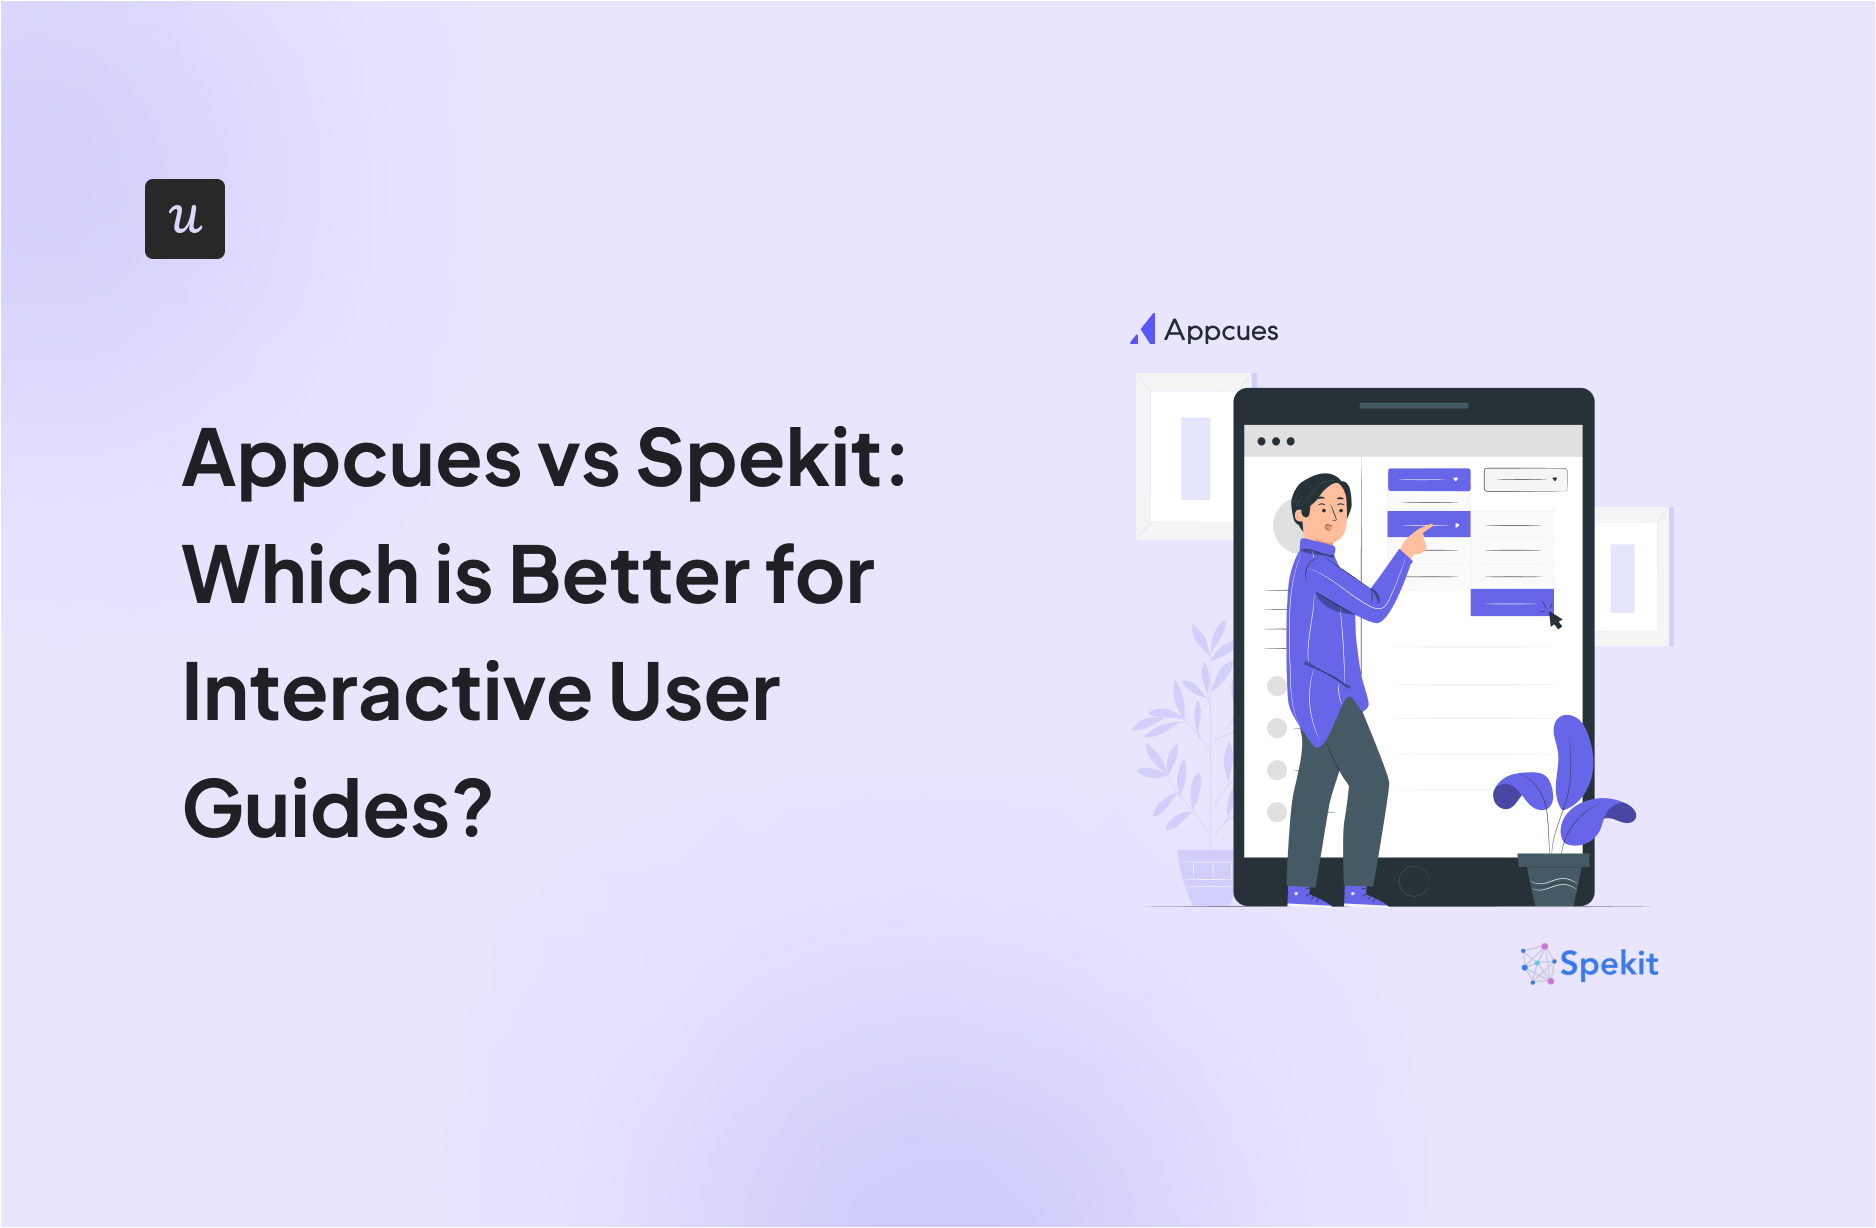 Appcues vs Spekit: Which is Better for Interactive User Guides?